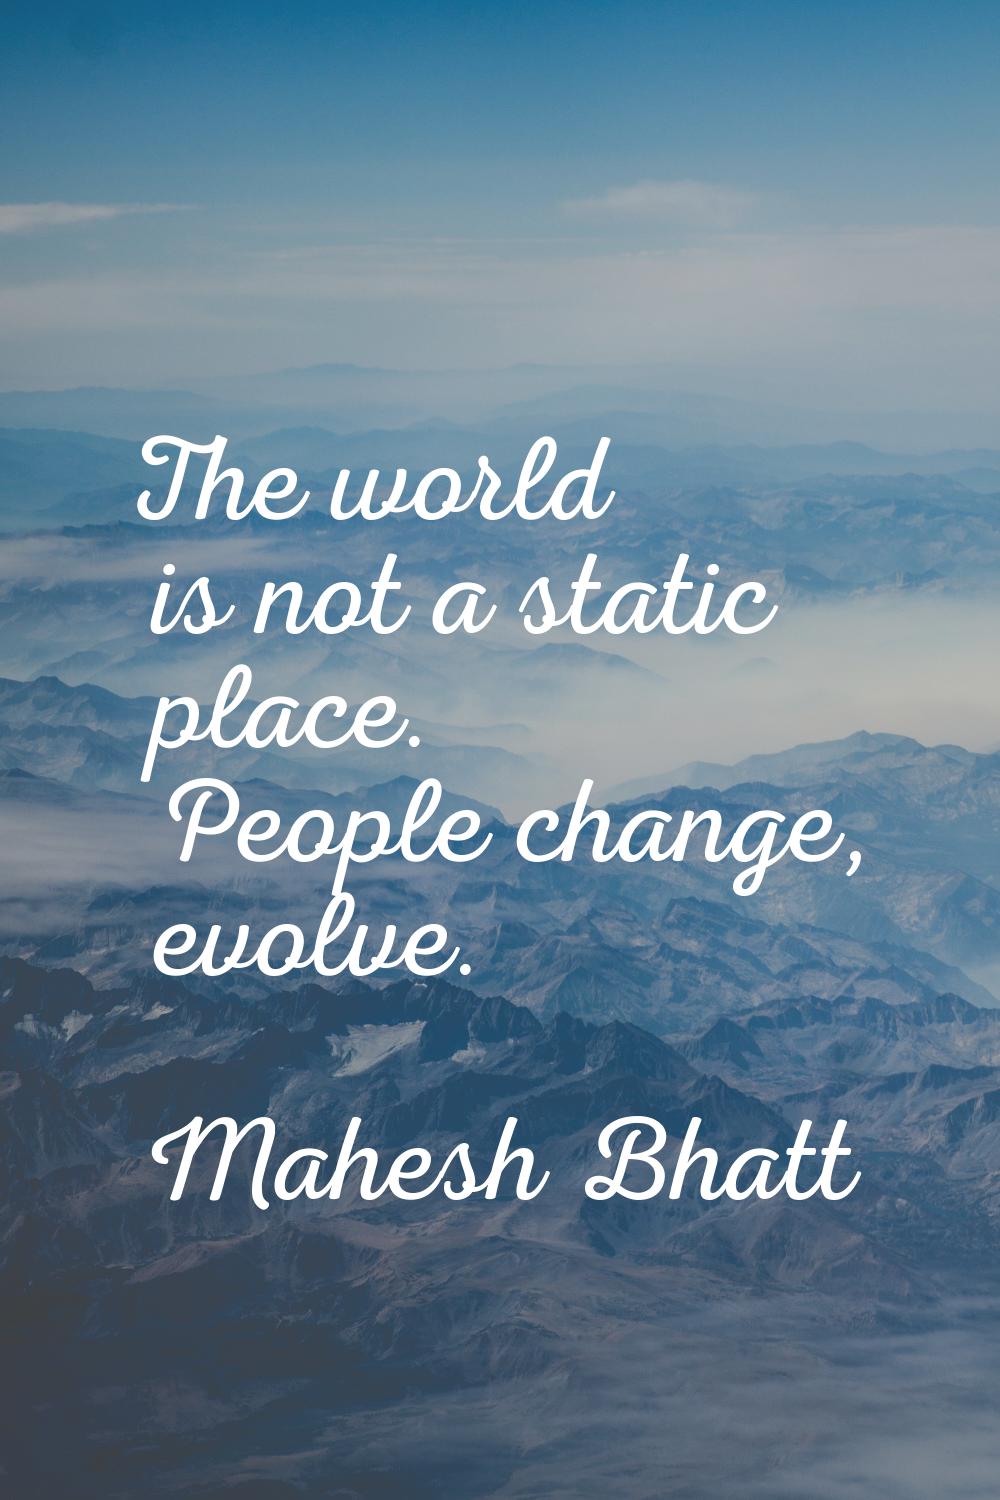 The world is not a static place. People change, evolve.